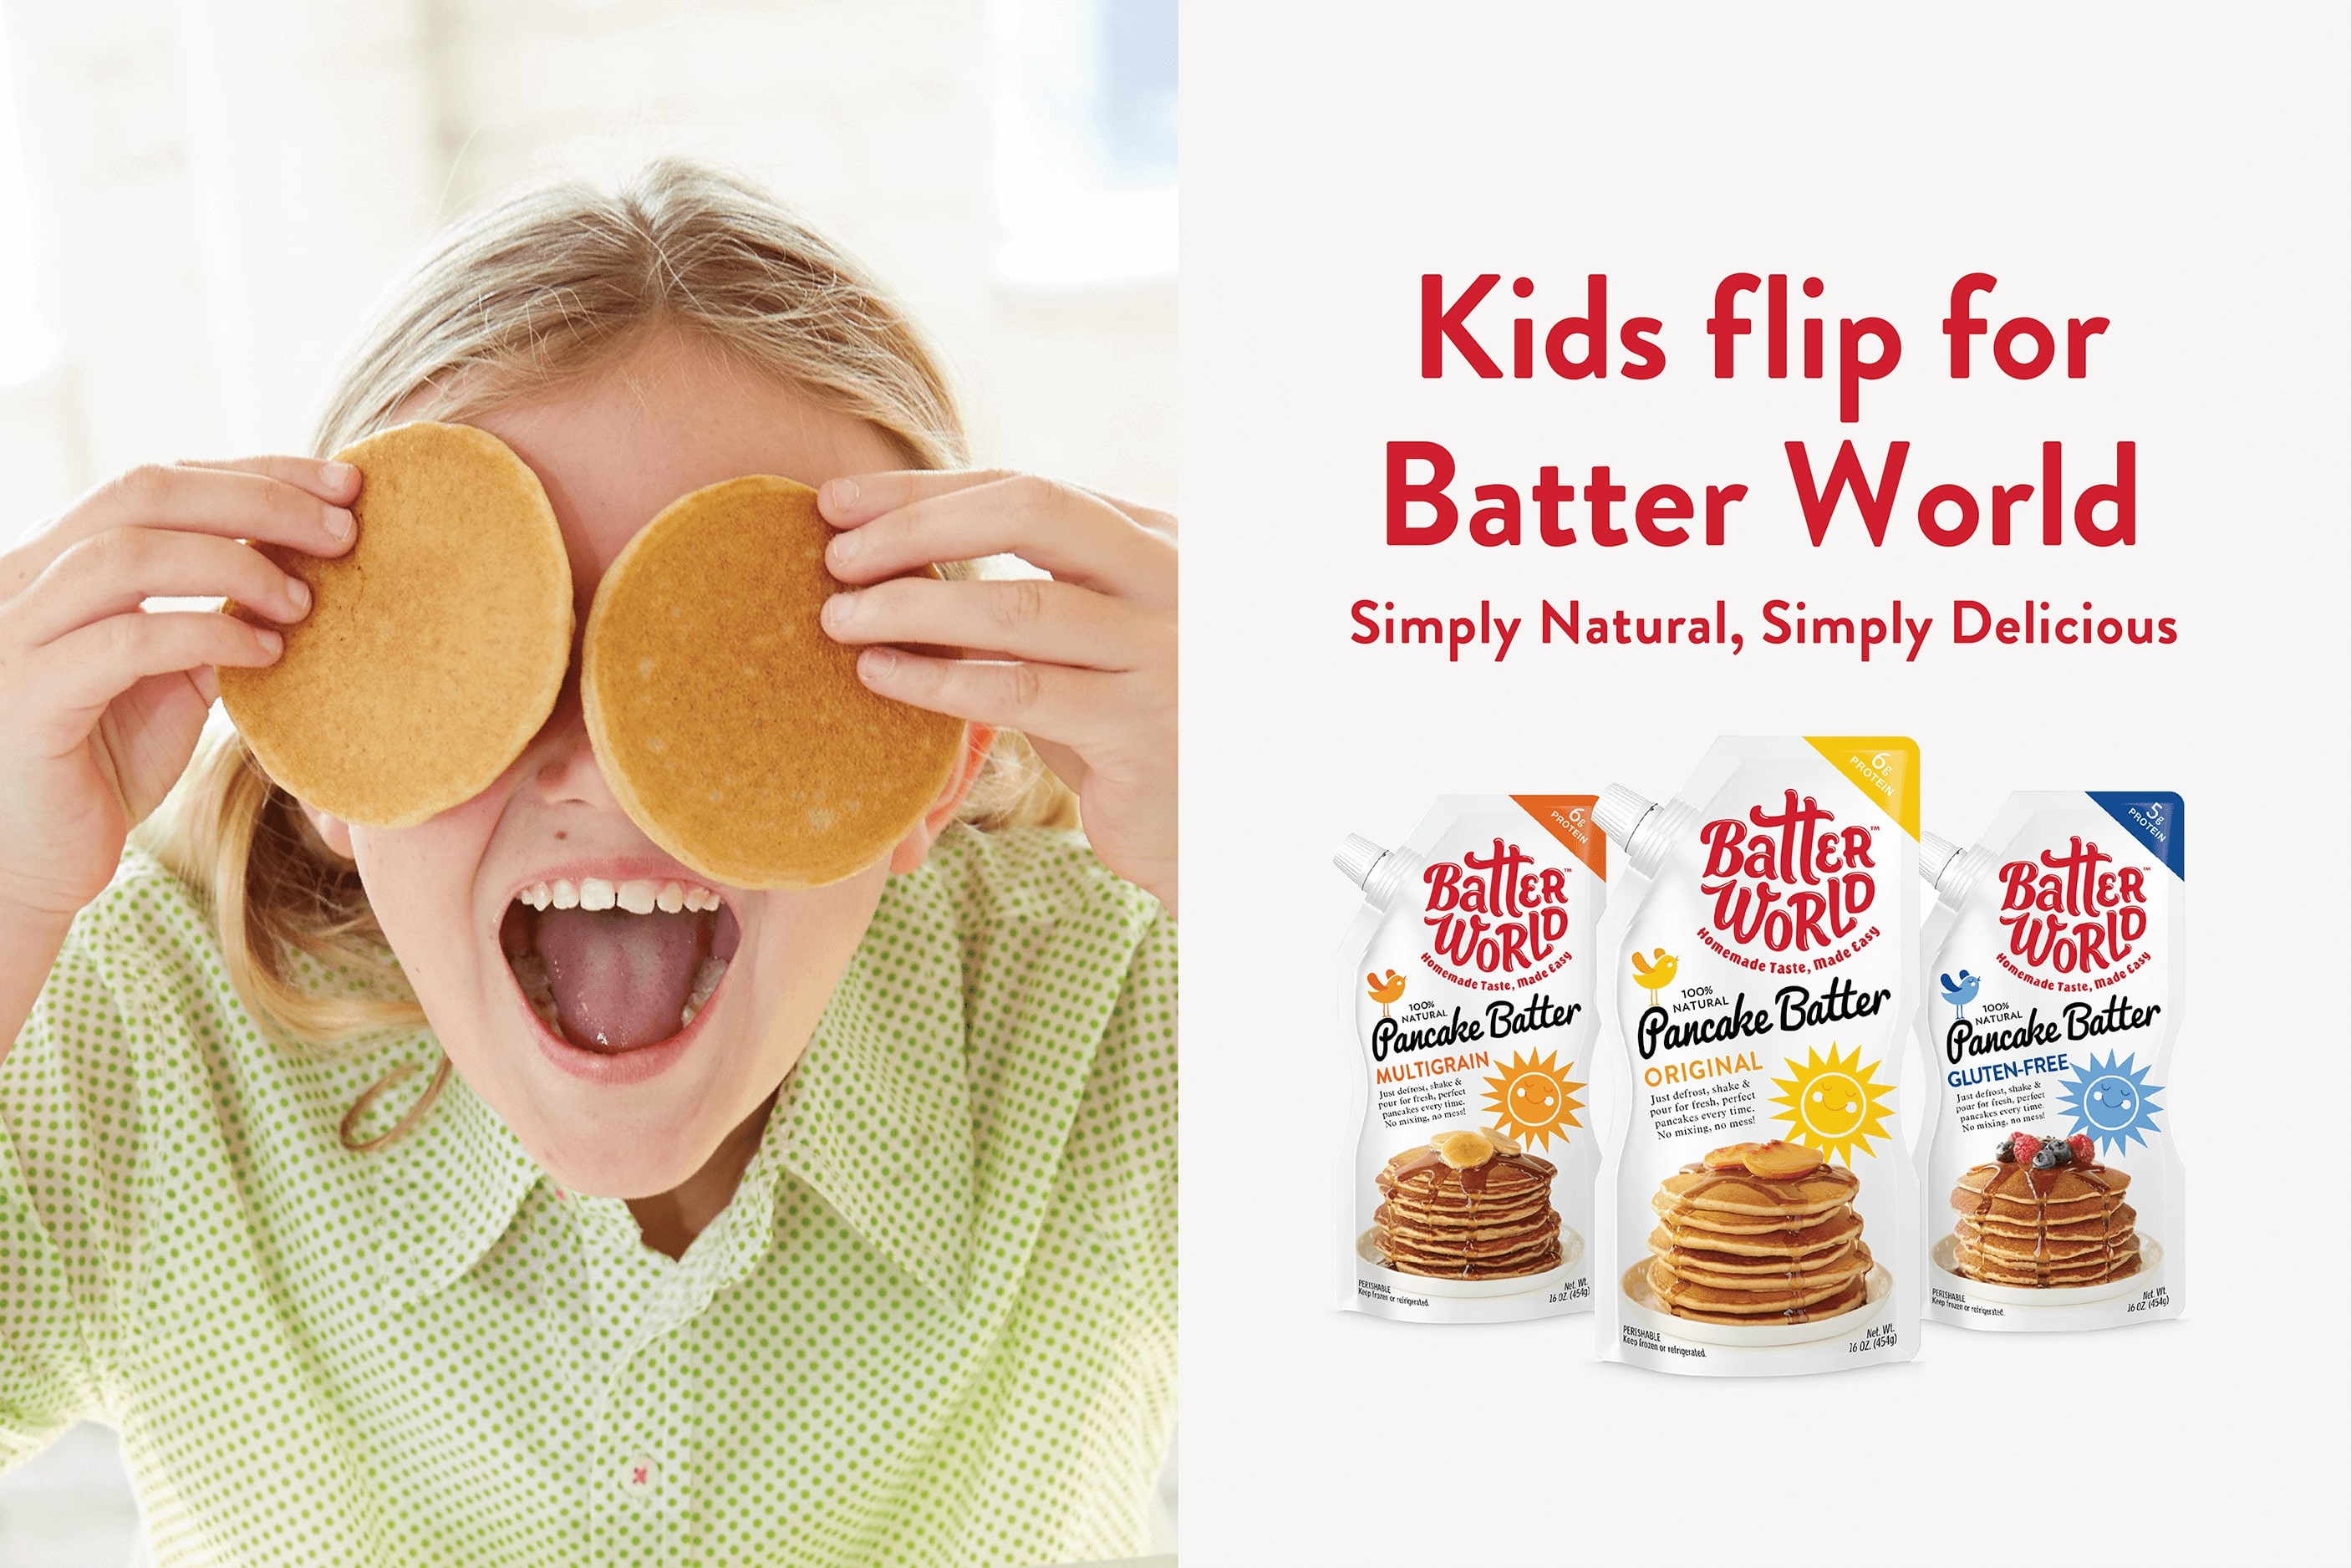 A young girl flipping for Batter World pancake Mix.